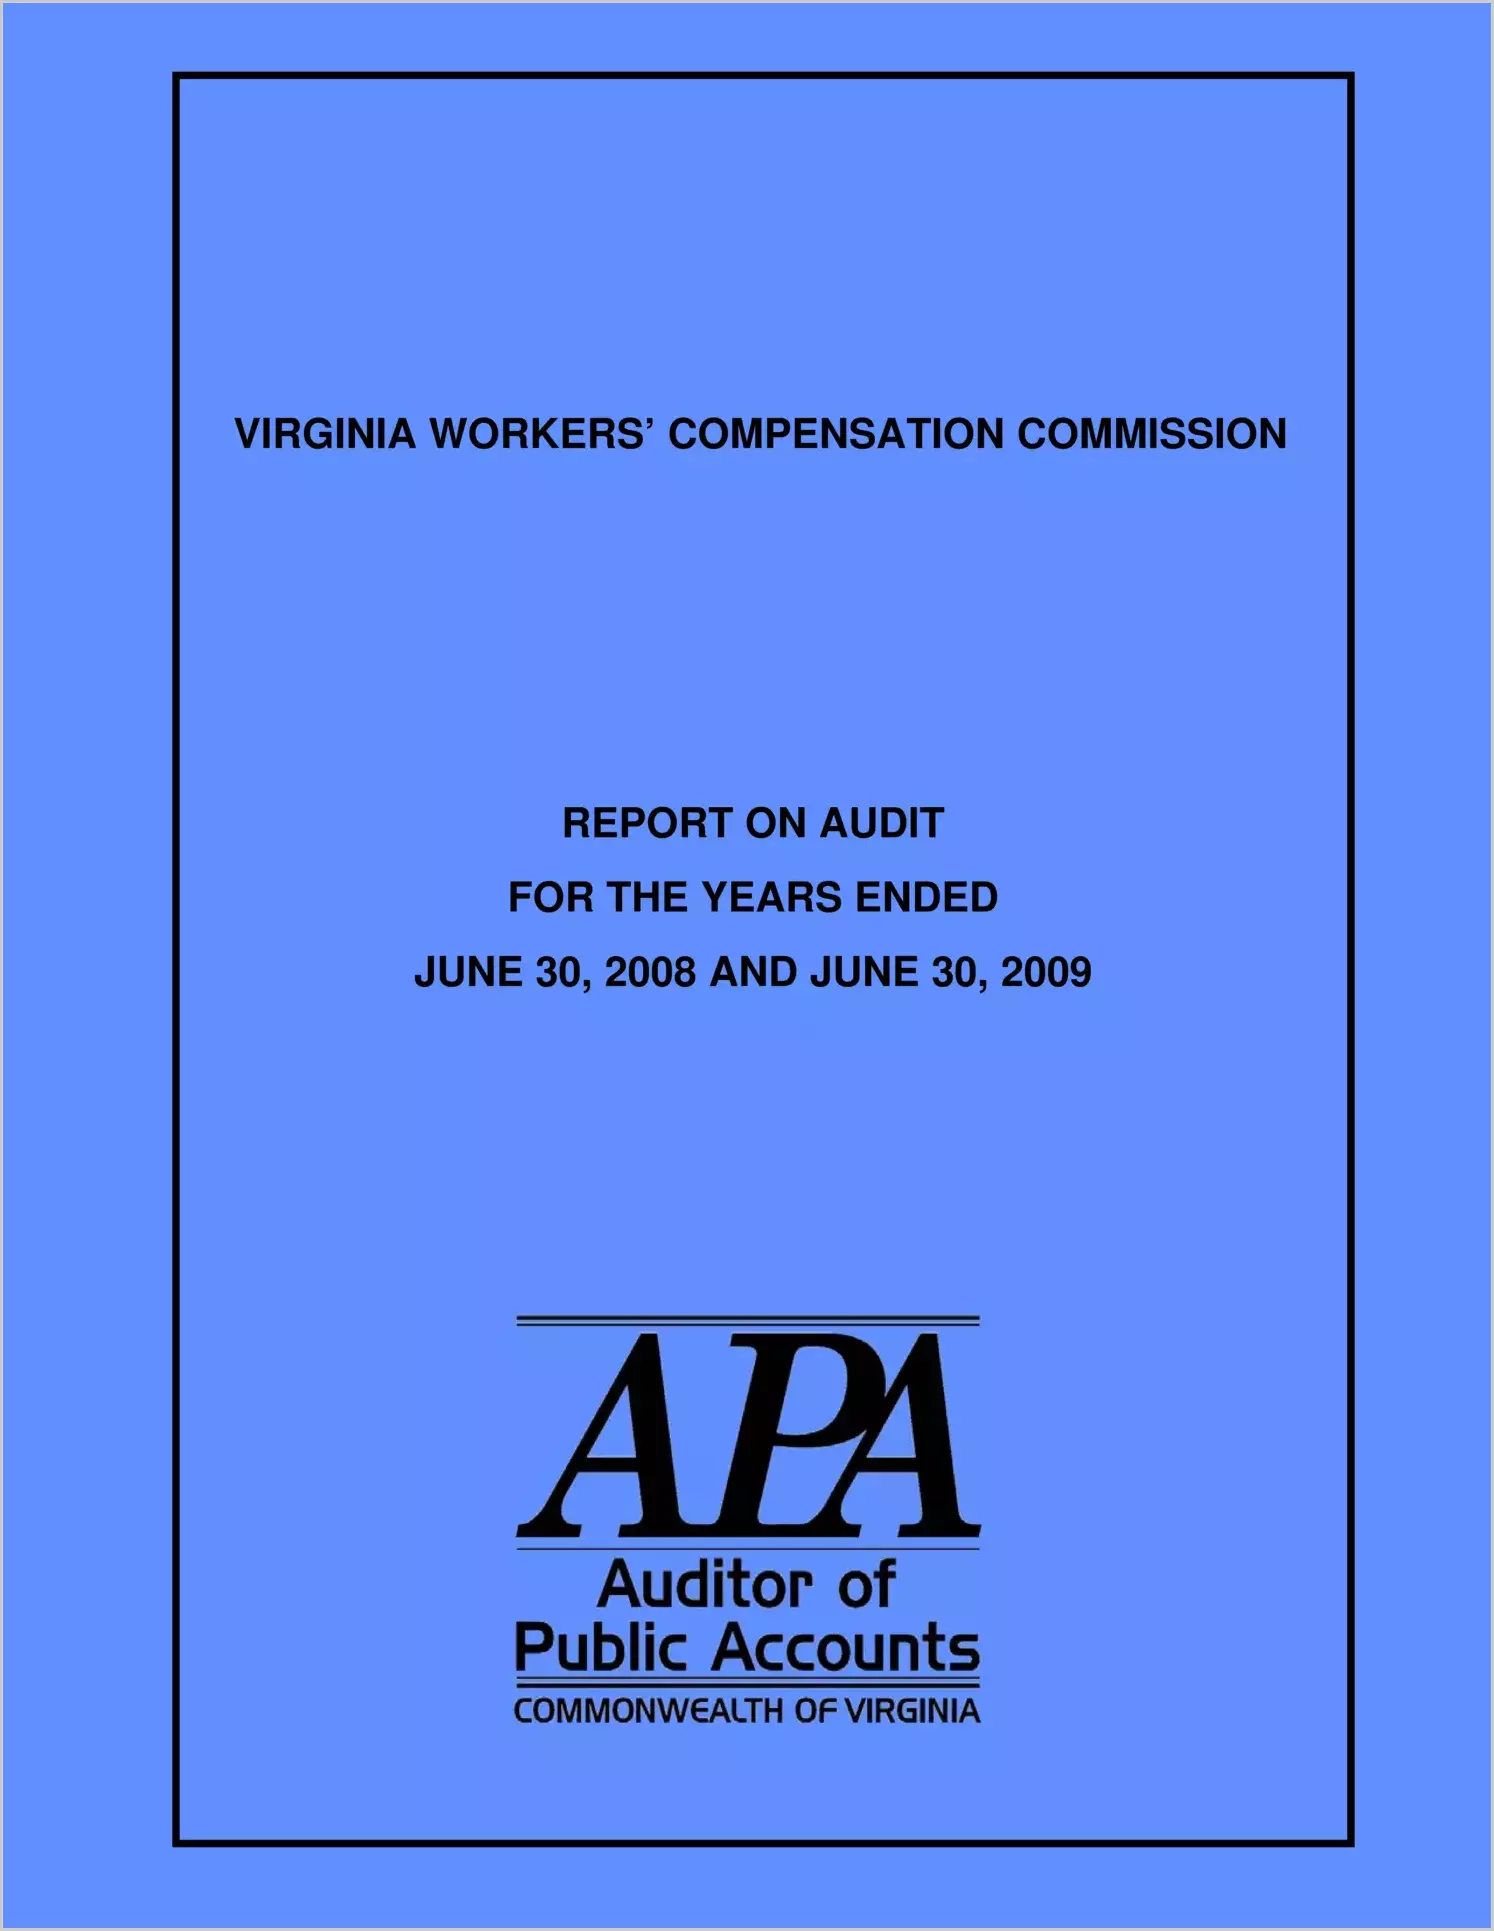 Virginia Worker's Compensation Commission for the years ended June 30, 2008 and June 30, 2009